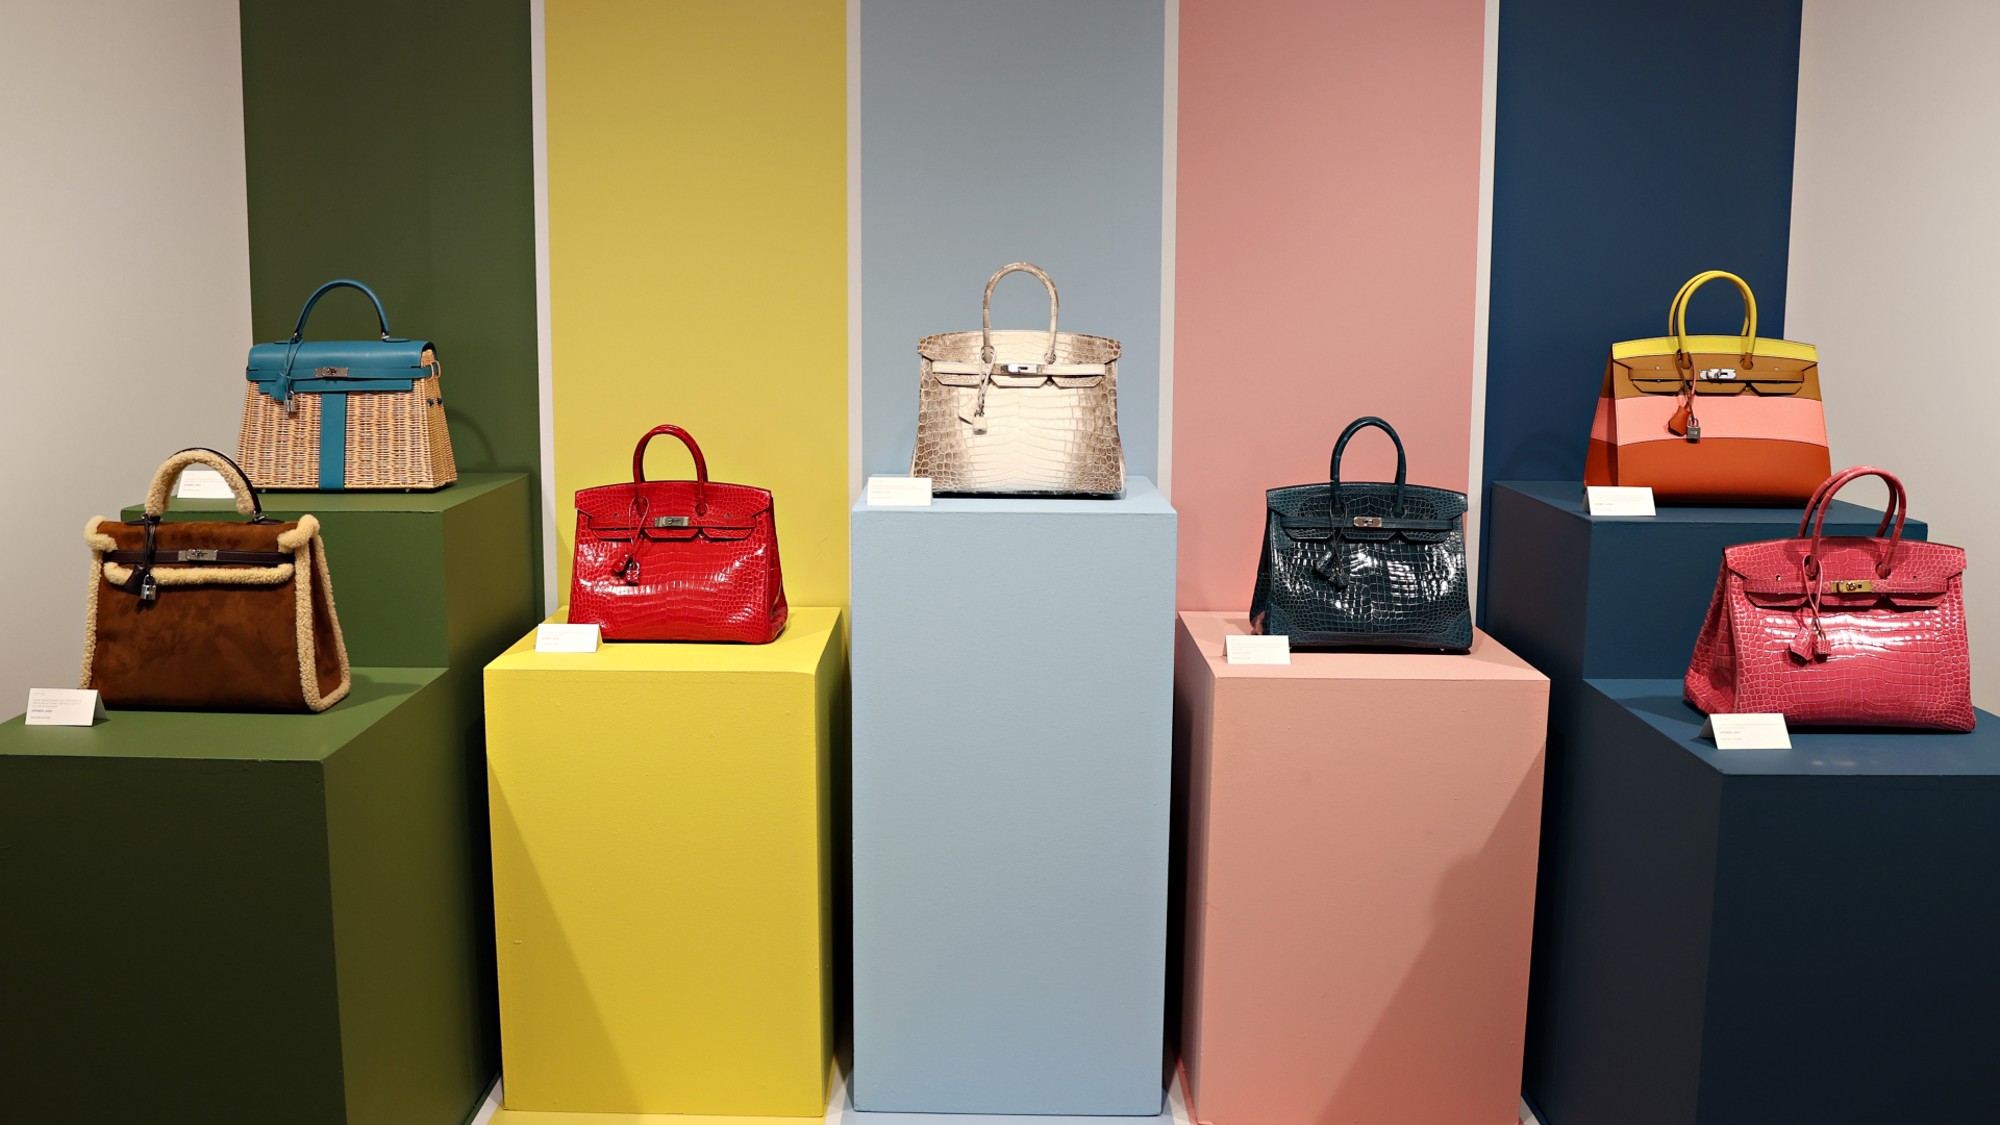  Controversy is brewing over a lawsuit involving Hermès' luxury bags 